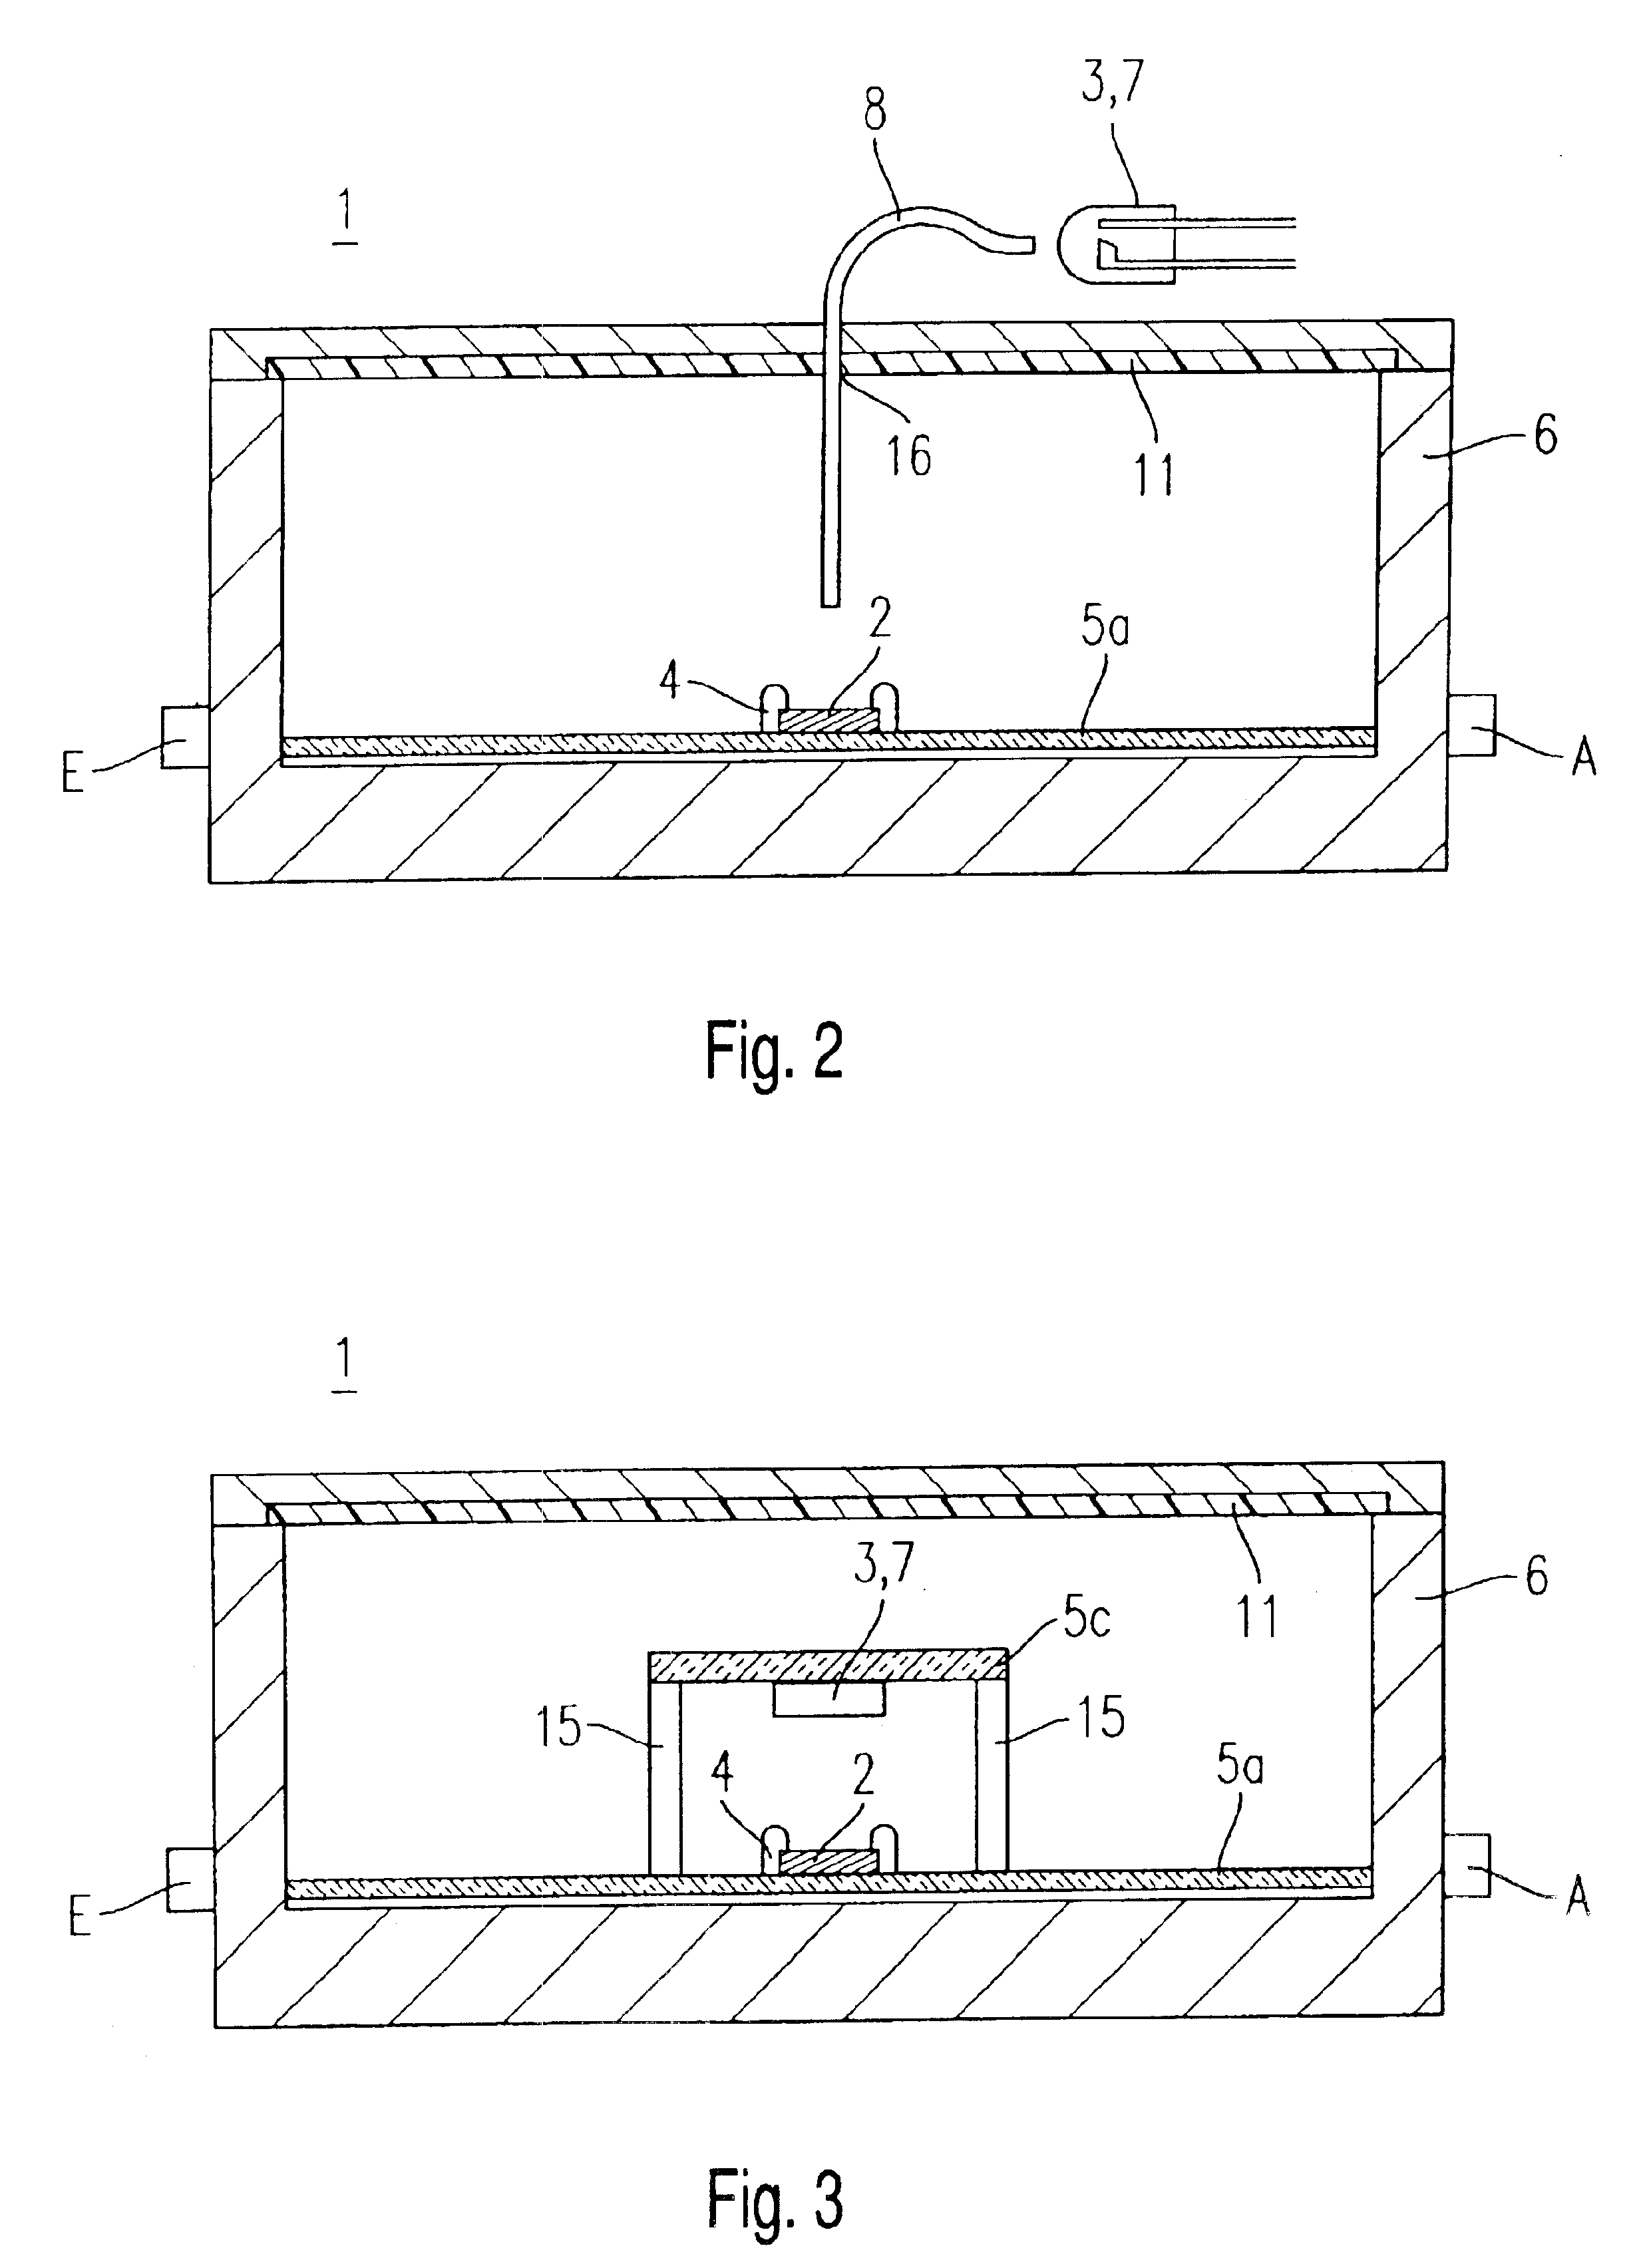 Microwave switching with illuminated field effect transistors